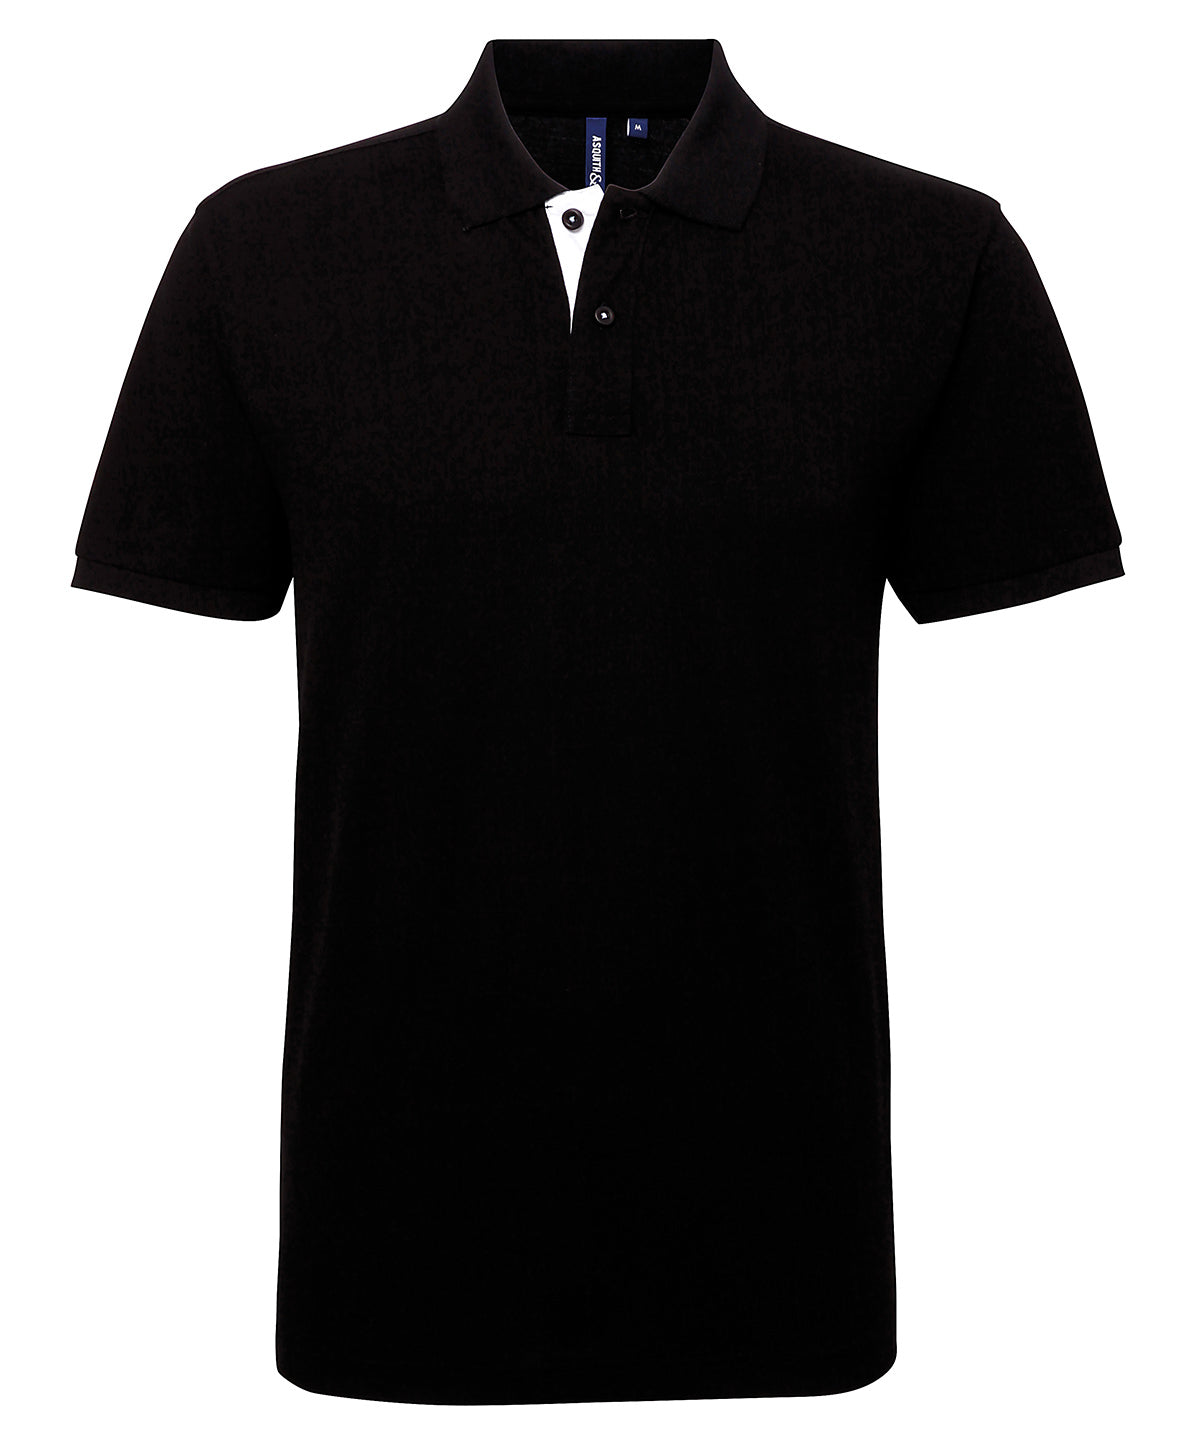 Personalised Polo Shirts - Black Asquith & Fox Men's classic fit contrast polo